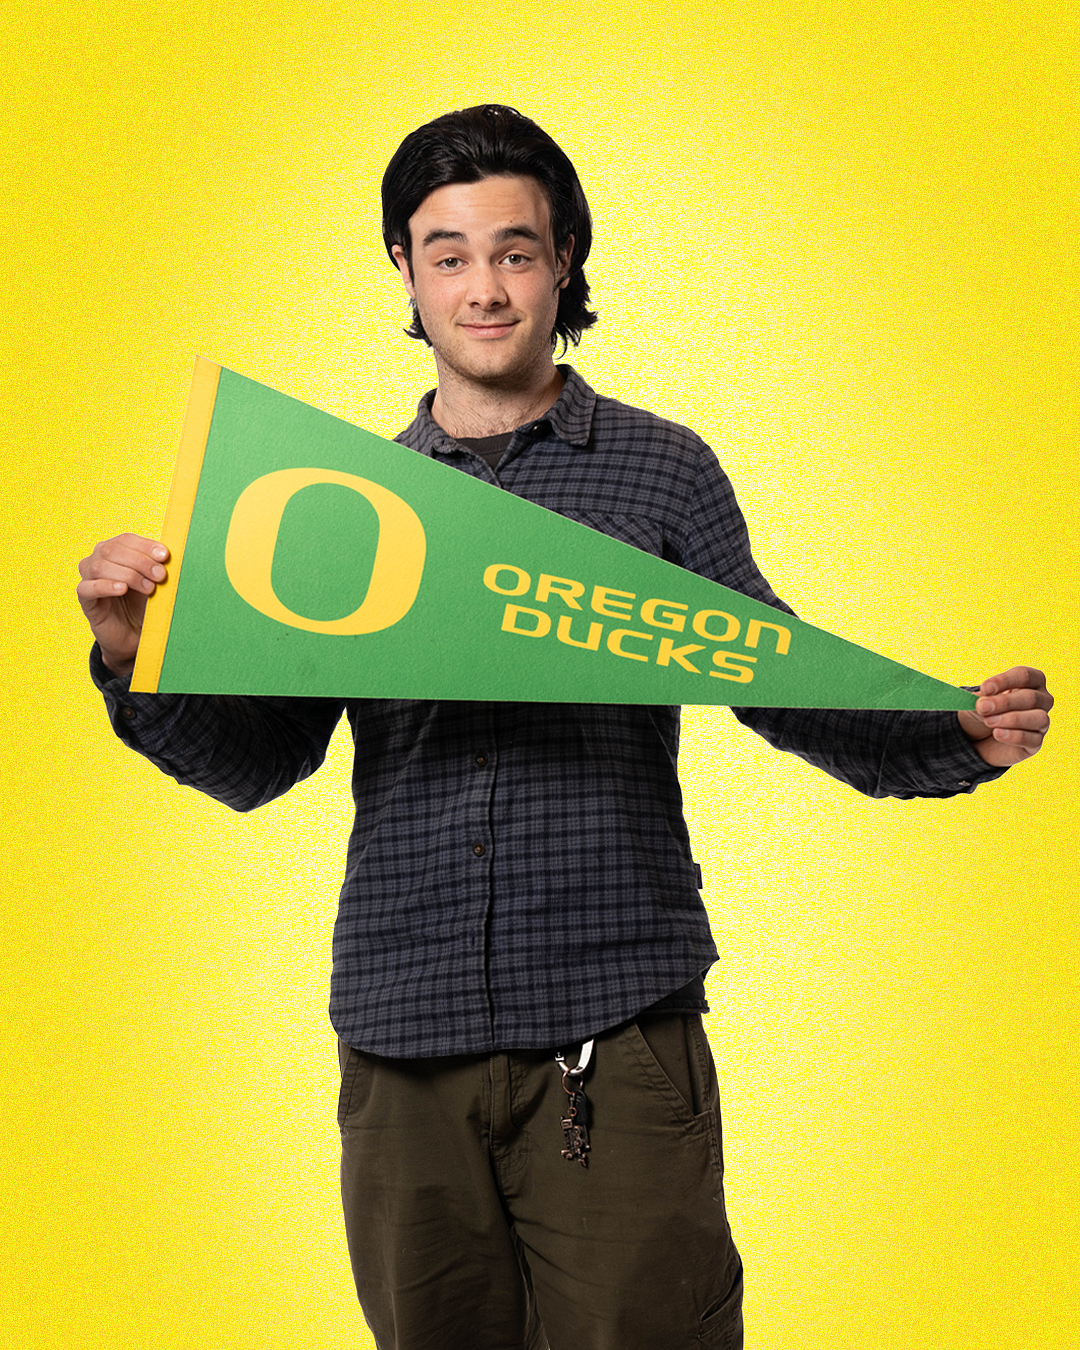 student declan zupo holding uofo pennant flag proudly